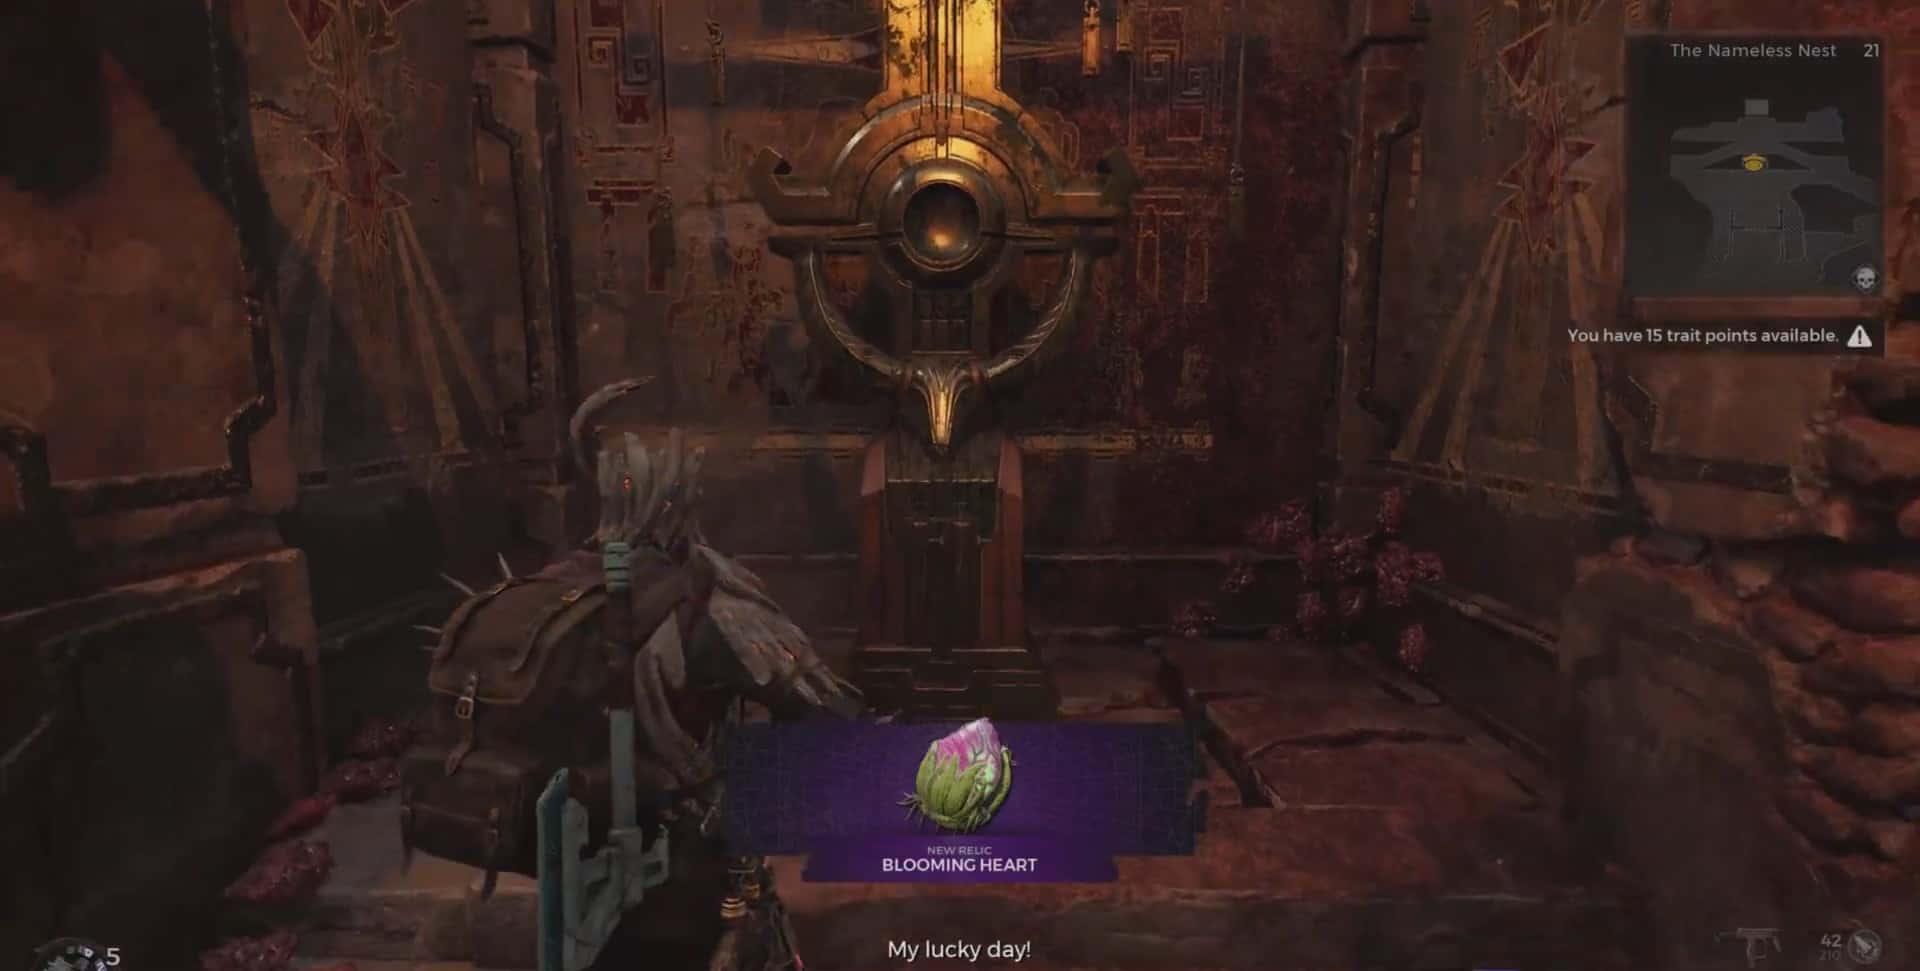 How To Find The Secret Blooming Heart Relic In Remnant 2